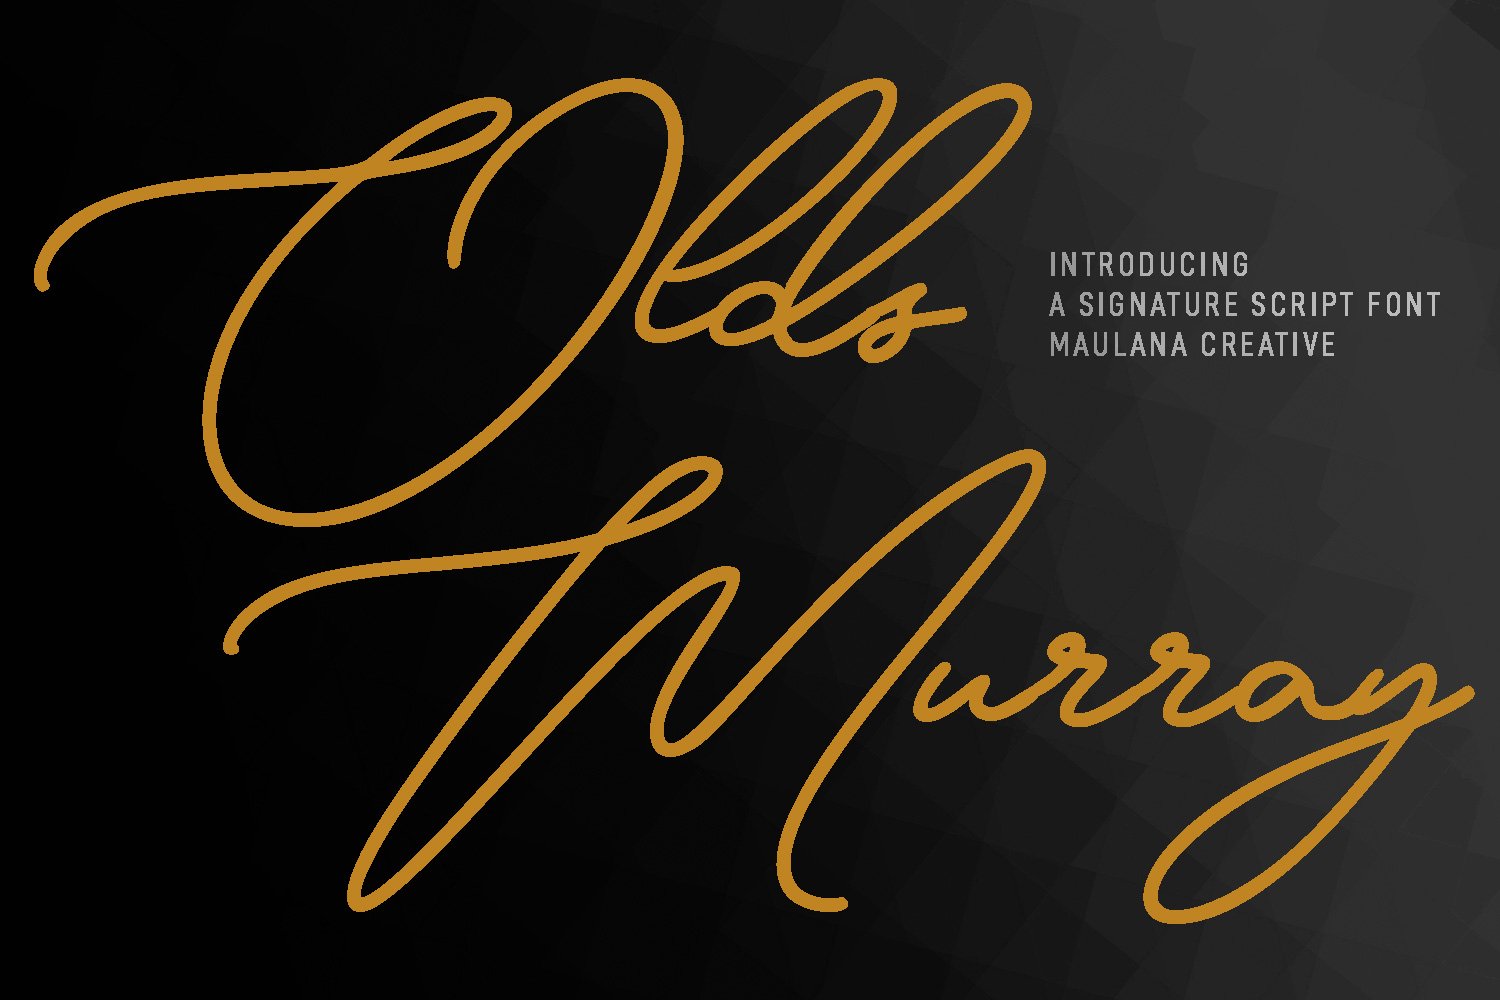 Olds Murray Signature Script Font cover image.